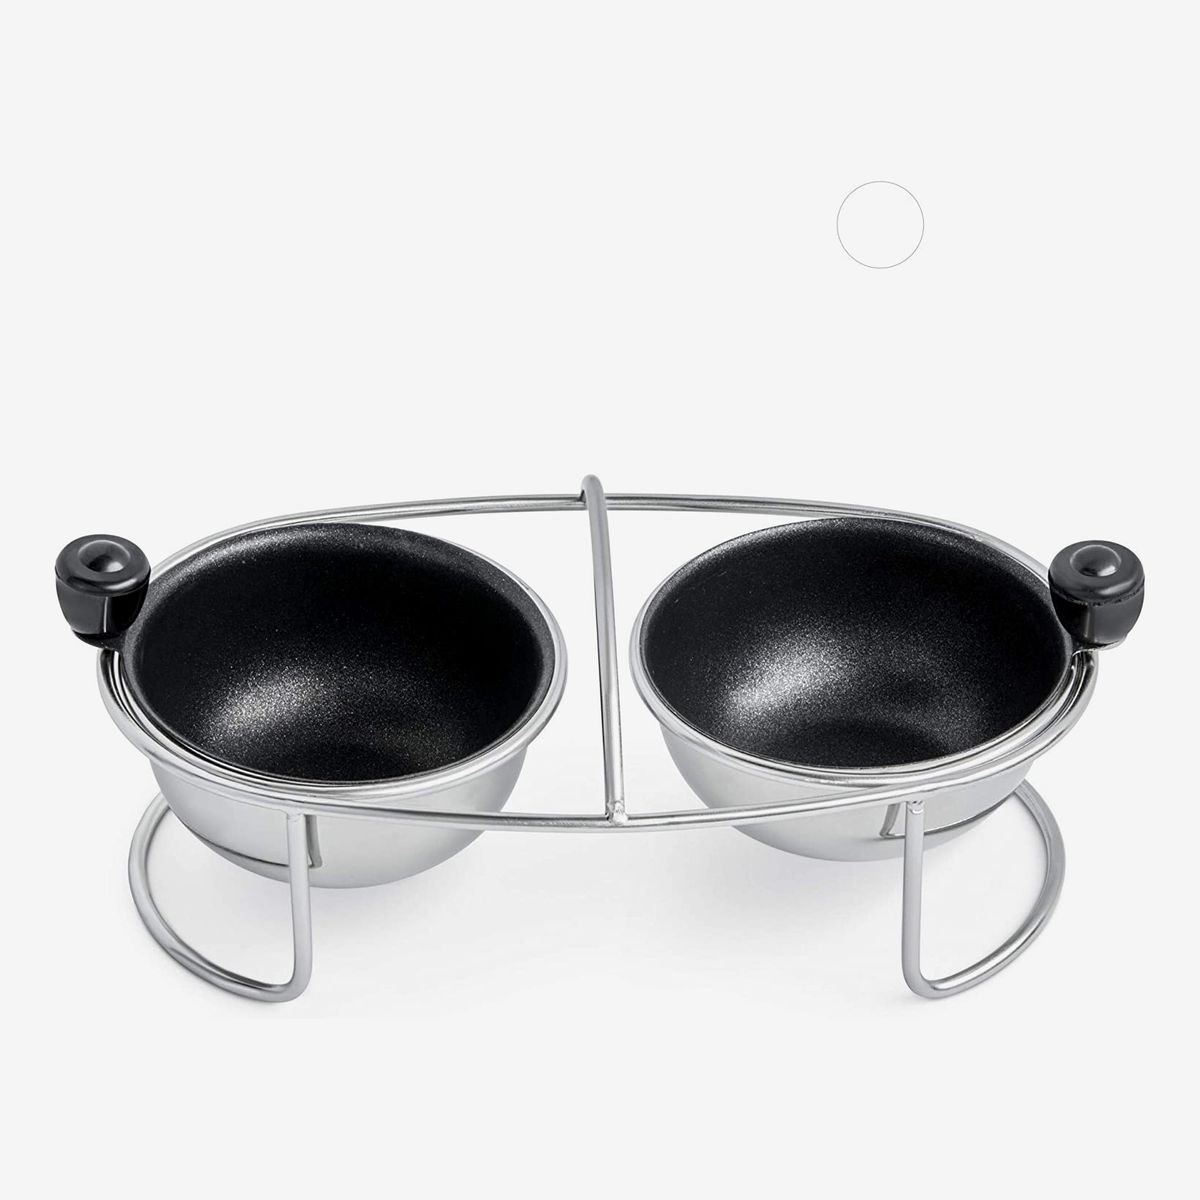 Poached Egg Pan Egg Boiler Cooker Egg Poacher Poached Egg Cups Stainless Steel Non-Stick for Steaming Eggs and Boiling Eggs 